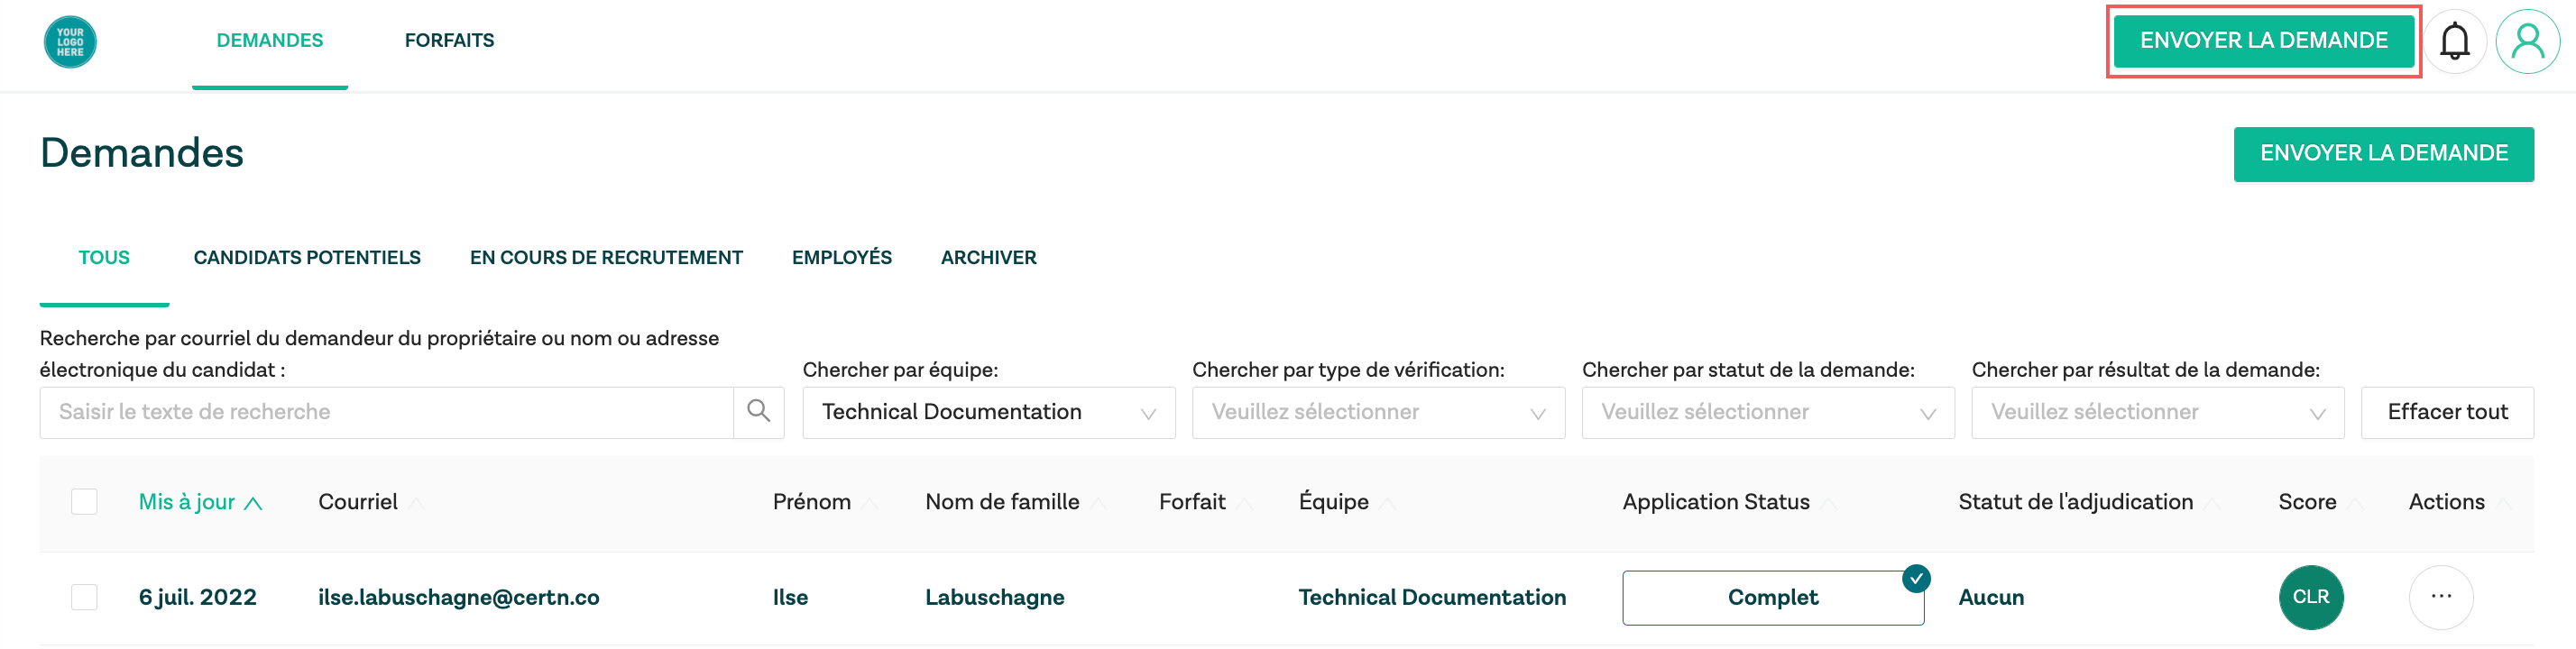 Dashboard_French_applications_page_screen_applicant.png